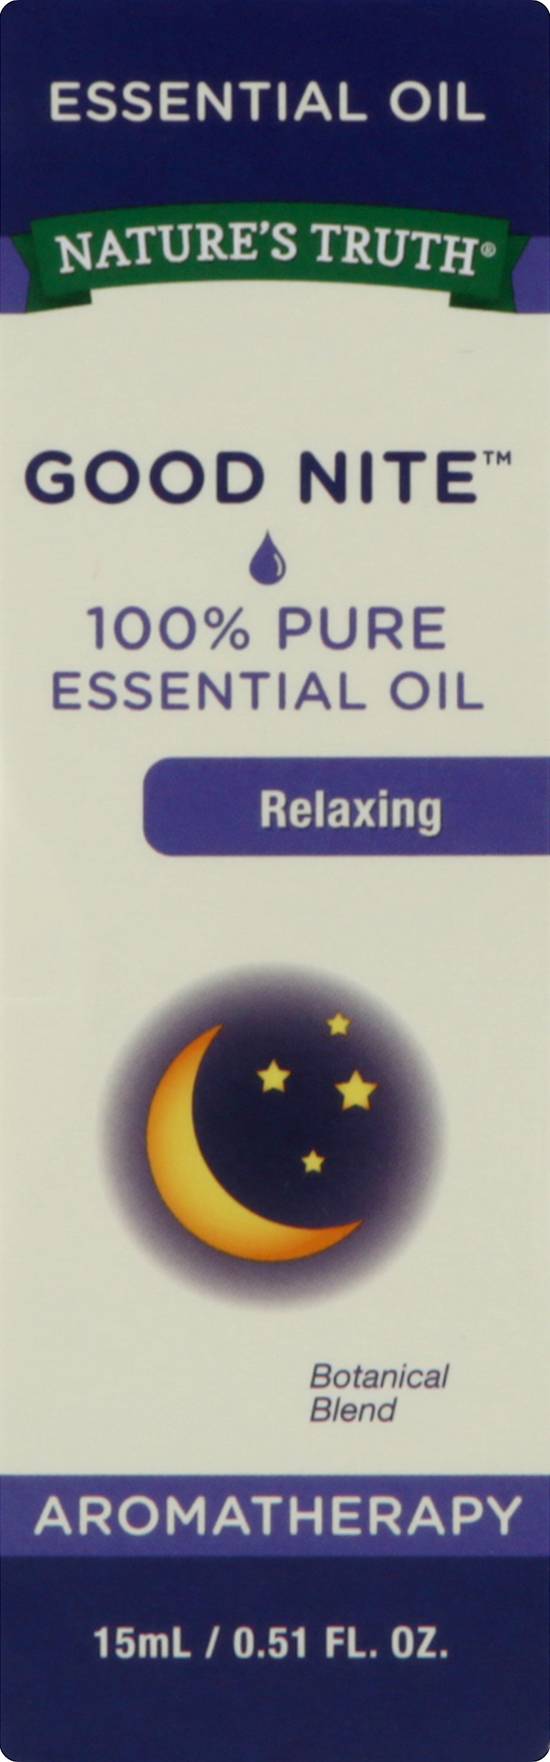 Nature's Truth Good Nite Aromatherapy Botanical Blend Pure Essential Oil